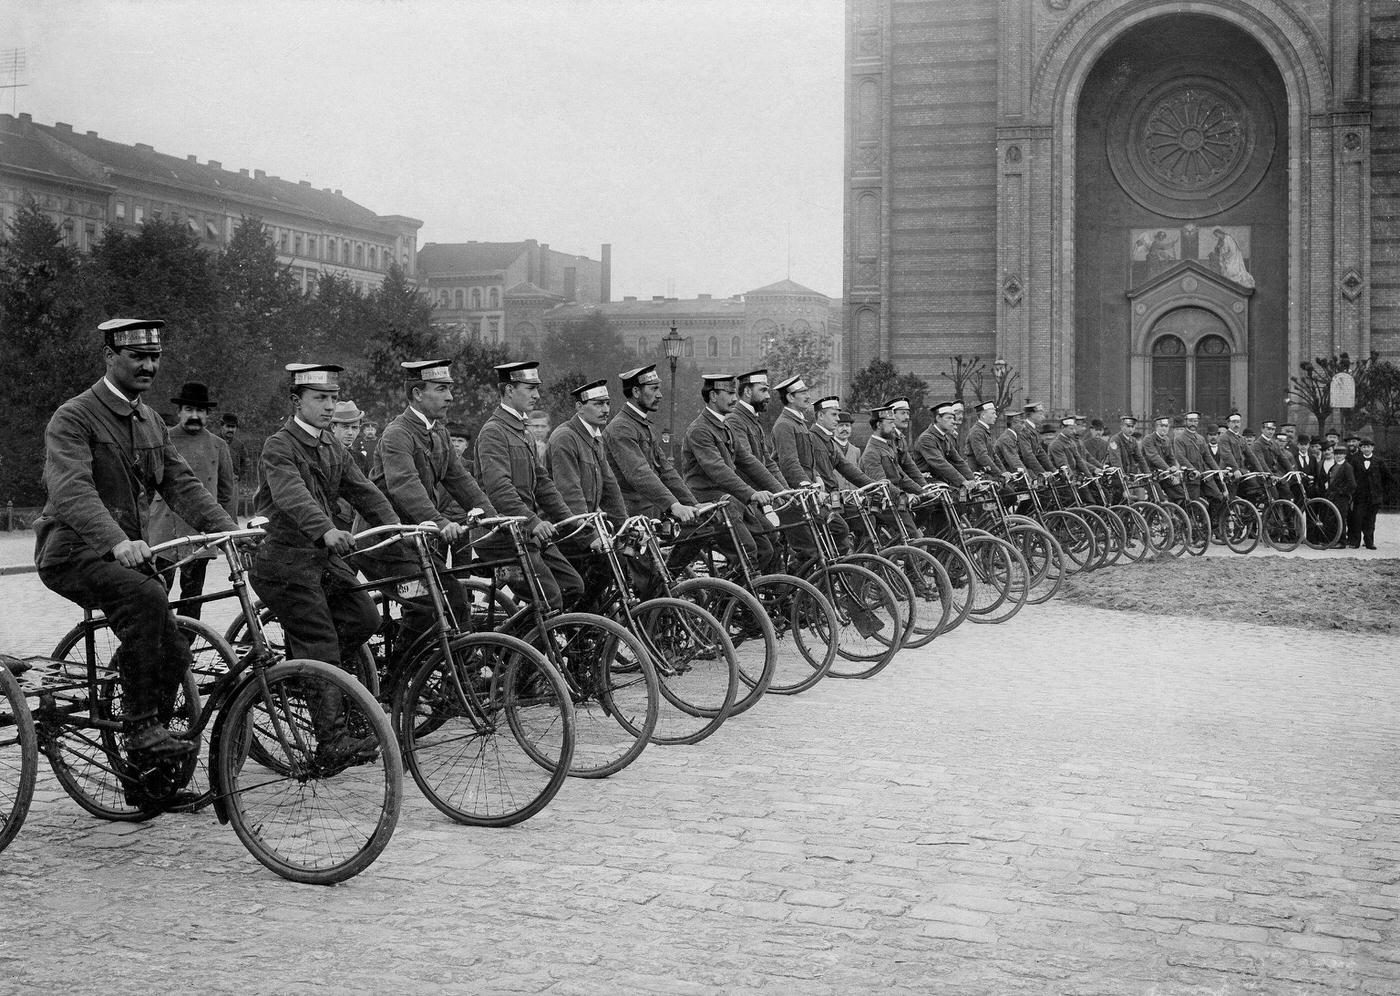 Group of 'service staff' on bicycles in Berlin, Germany, 1897